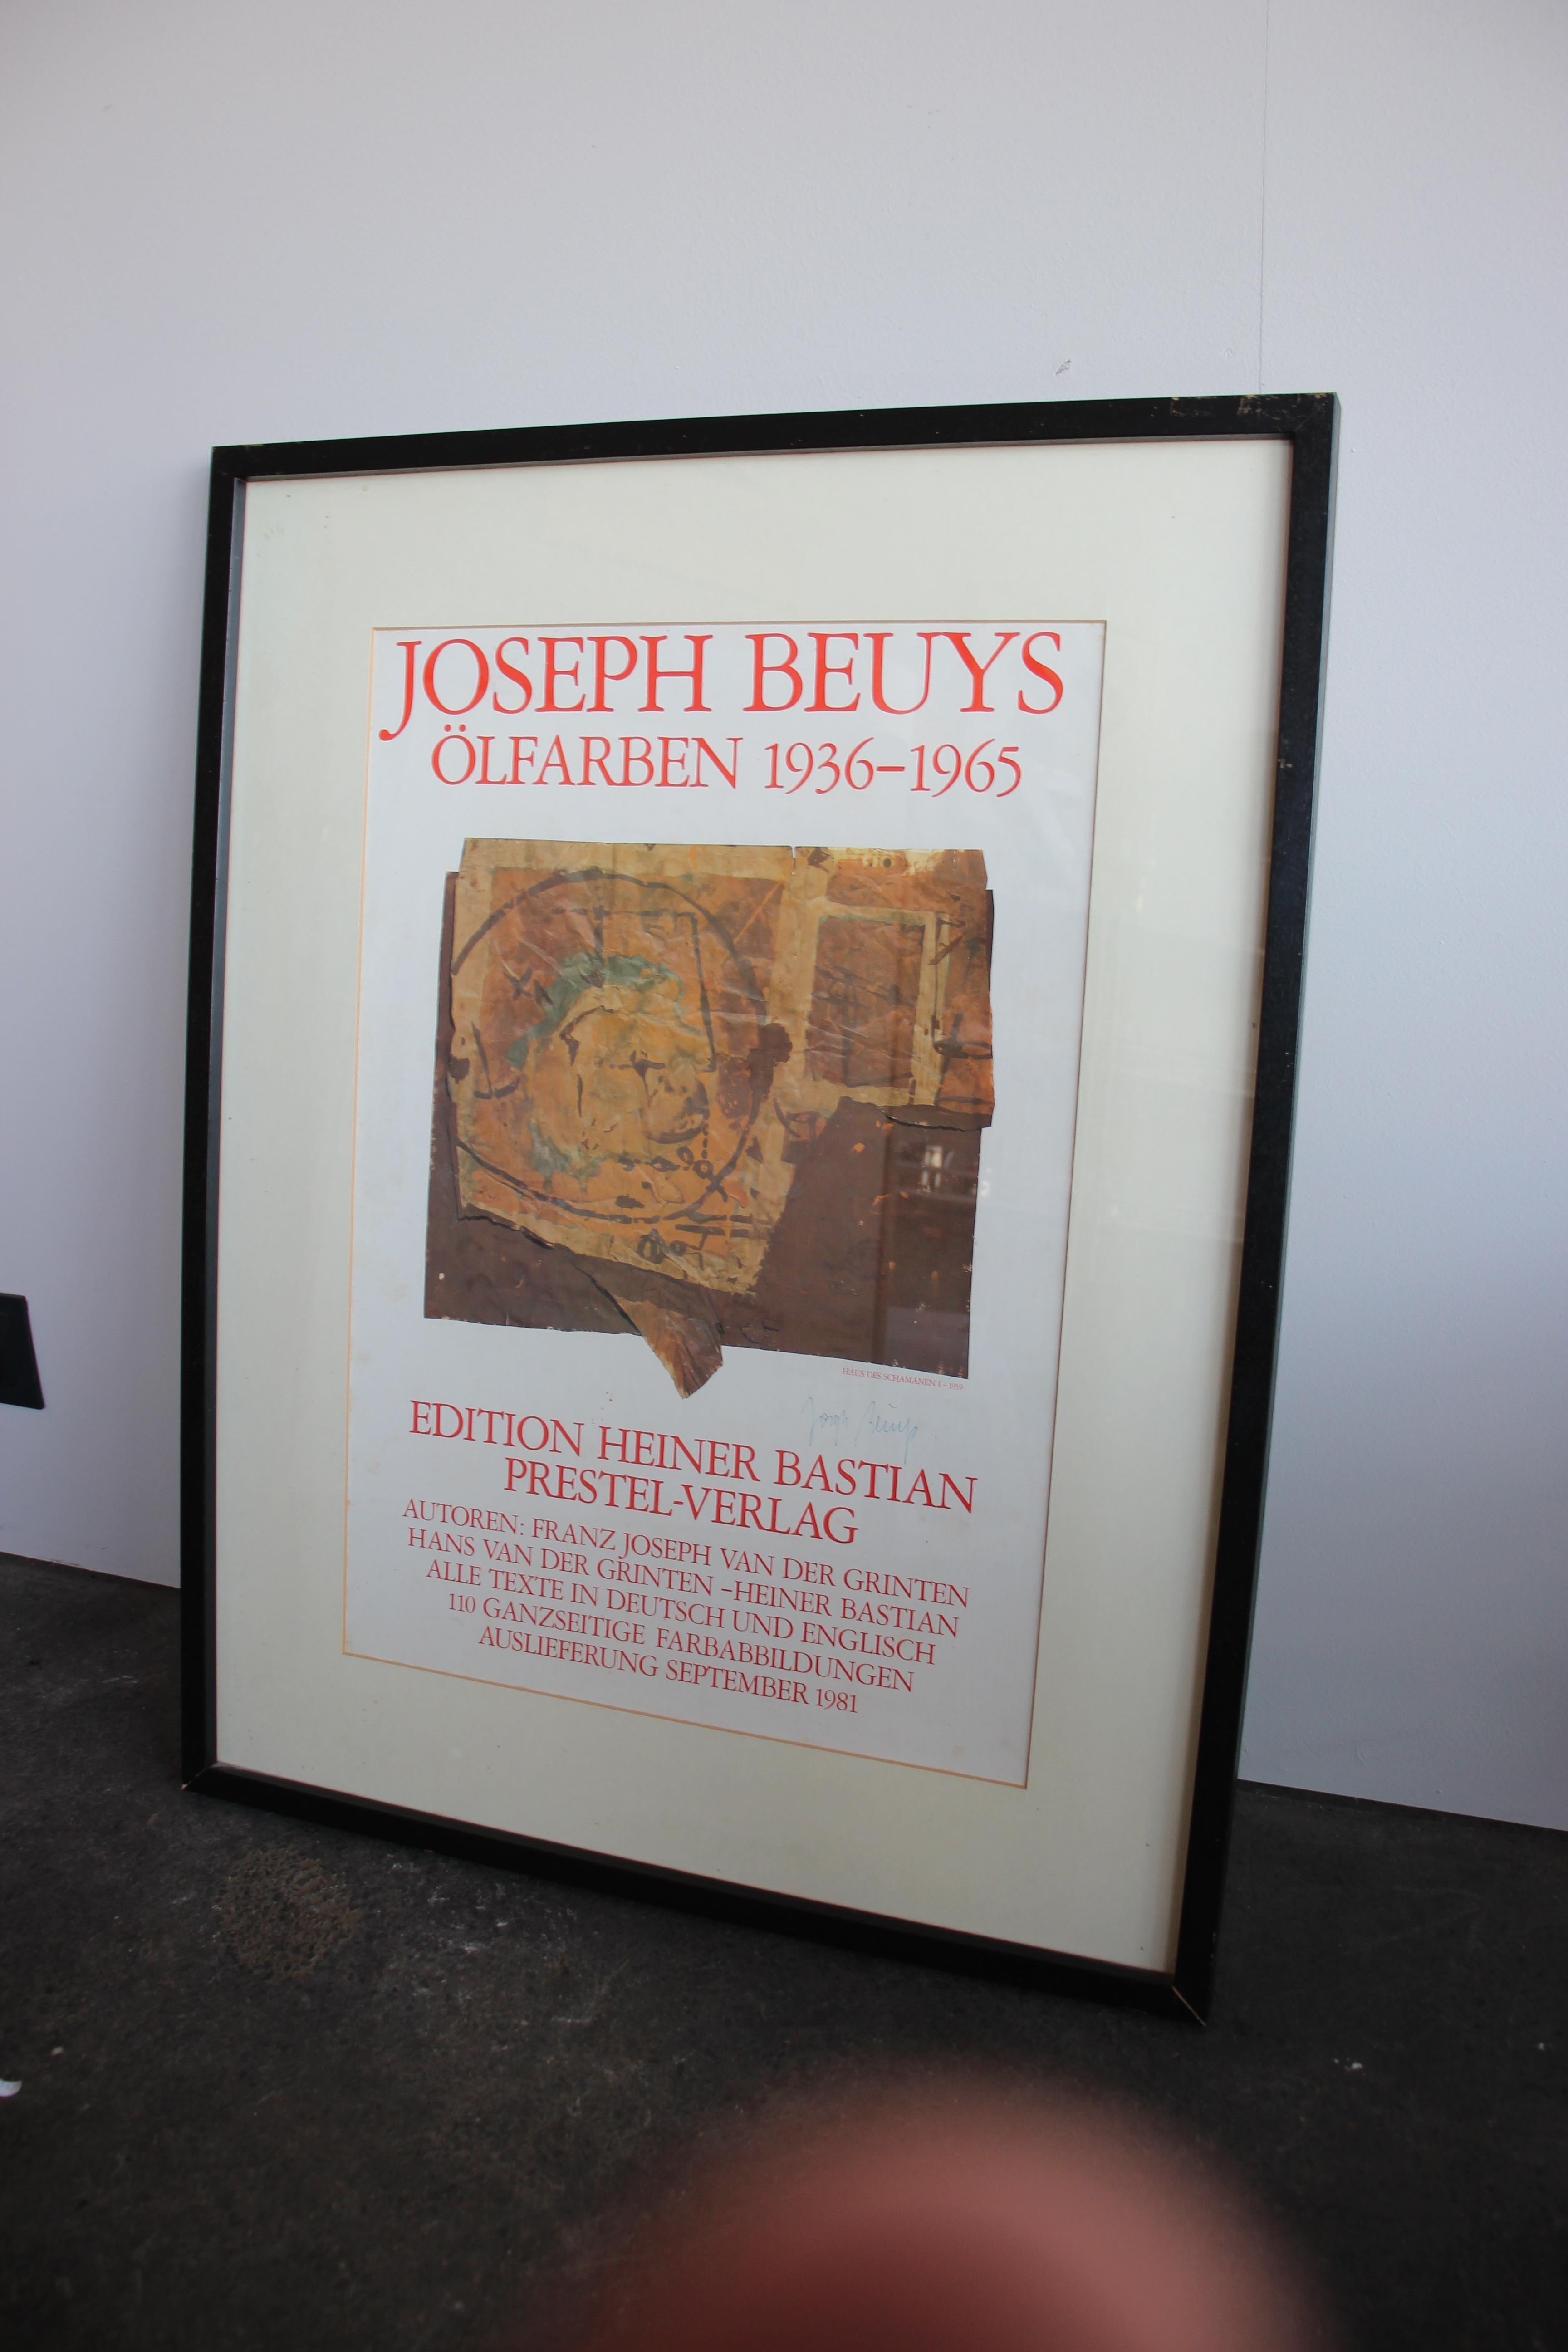 Original advertisement poster from 1981 for a book on Beuys oil paintings from 1936 to 1965. Signed by Beuys himself. 
 This poster is an offset print with an artist's signature in the middle right area. It was signed with a blue pen. The picture